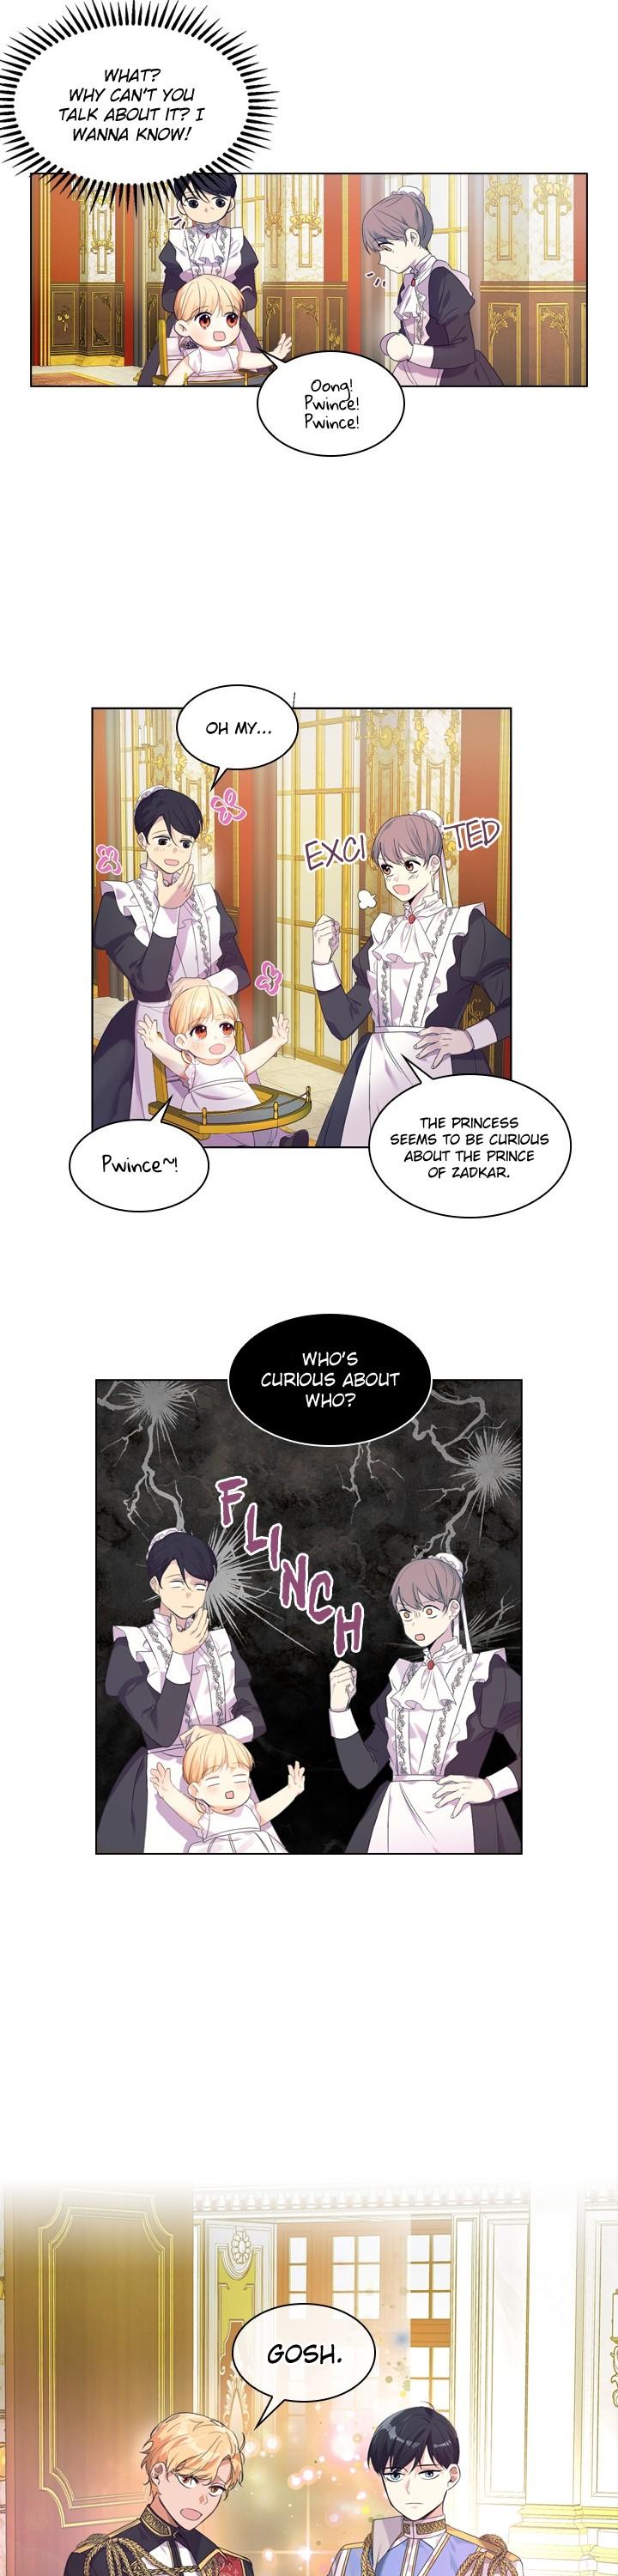 The Youngest Princess - Page 4